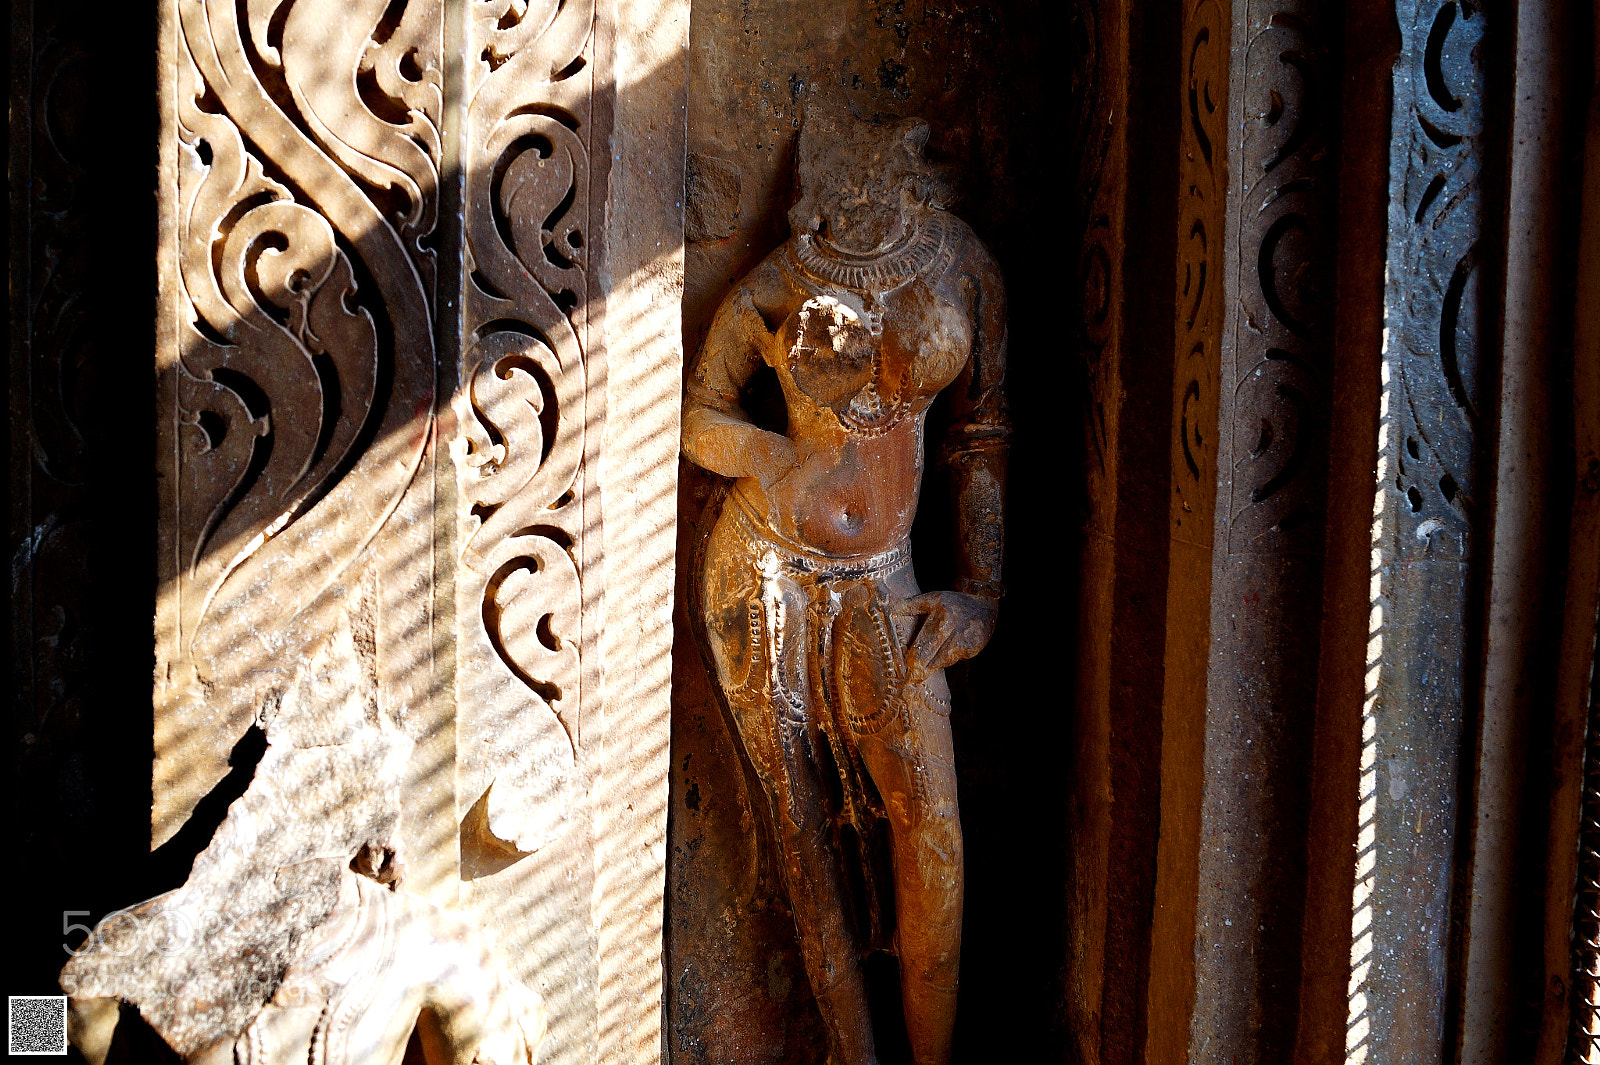 Sony SLT-A58 sample photo. Devi idol ruined by photography